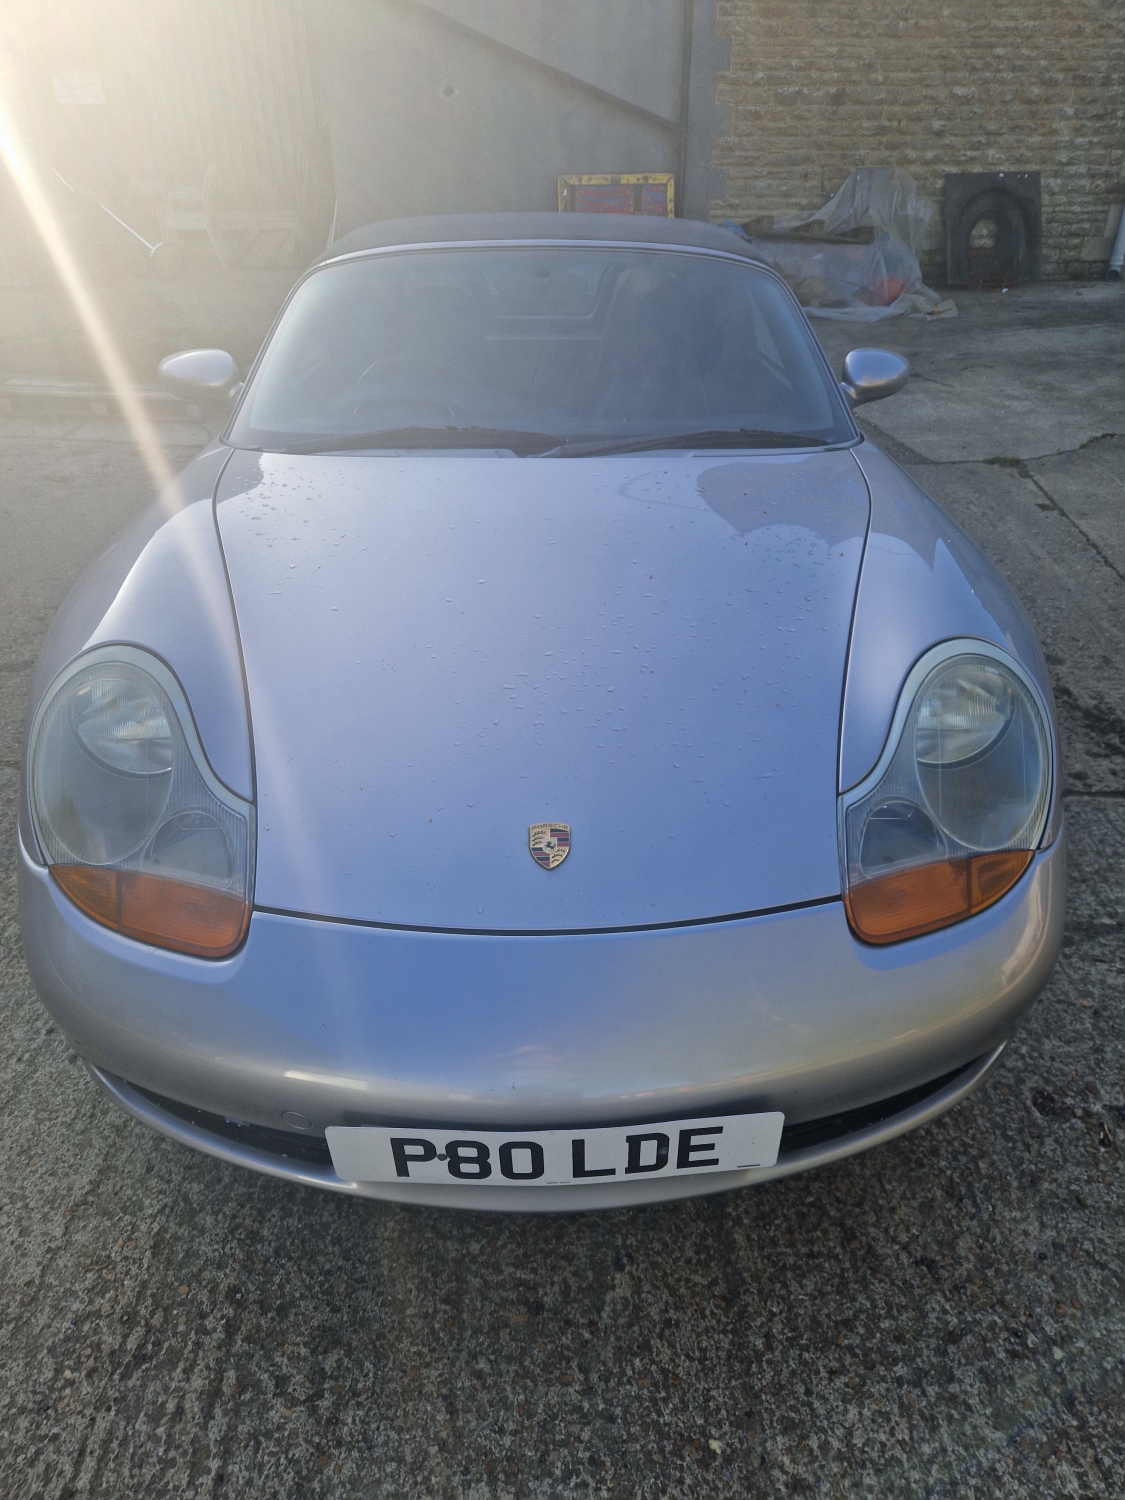 PORSCHE BOXTER CONVERTIBLE 2002. 129,000 MILES. NEW MOT. MUCH SERVICE HISTORY, OWNERS MANUAL. GOOD - Image 3 of 7